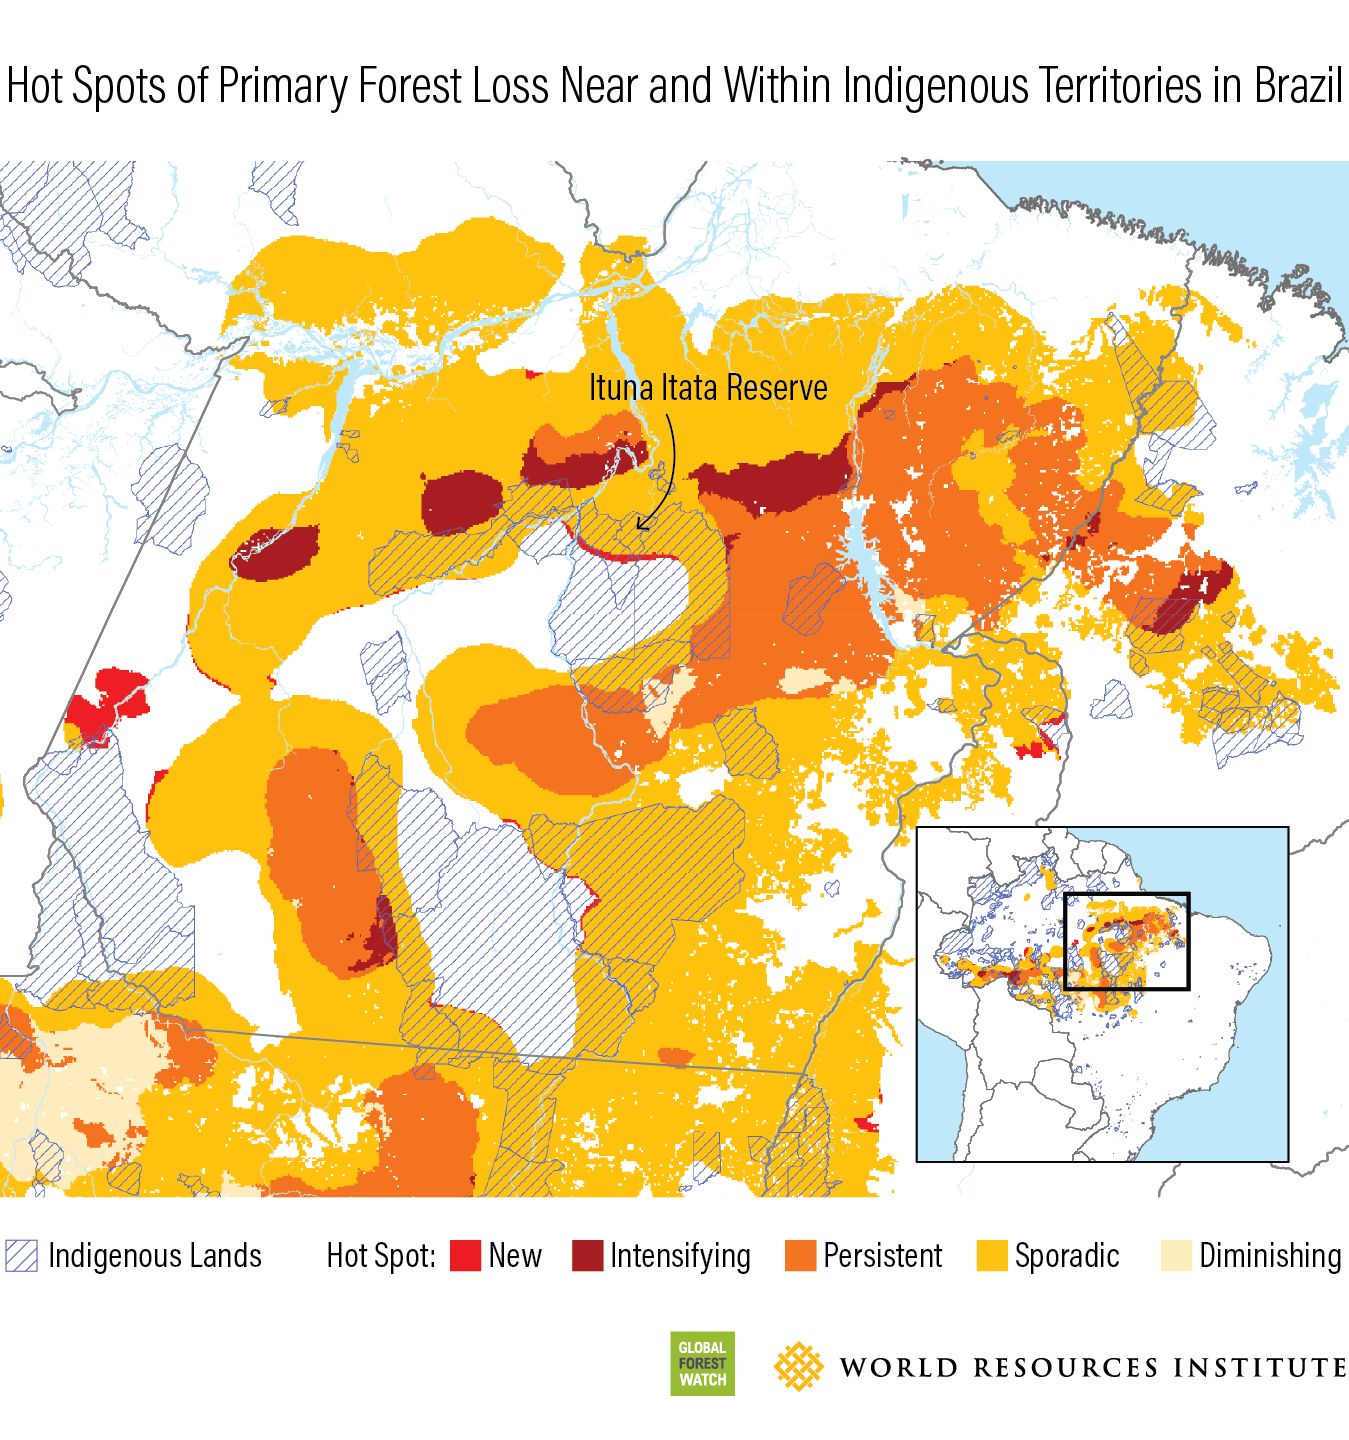 Hot Spots of Primary forest Loss Near and Within Indigenous Territories in Brazil